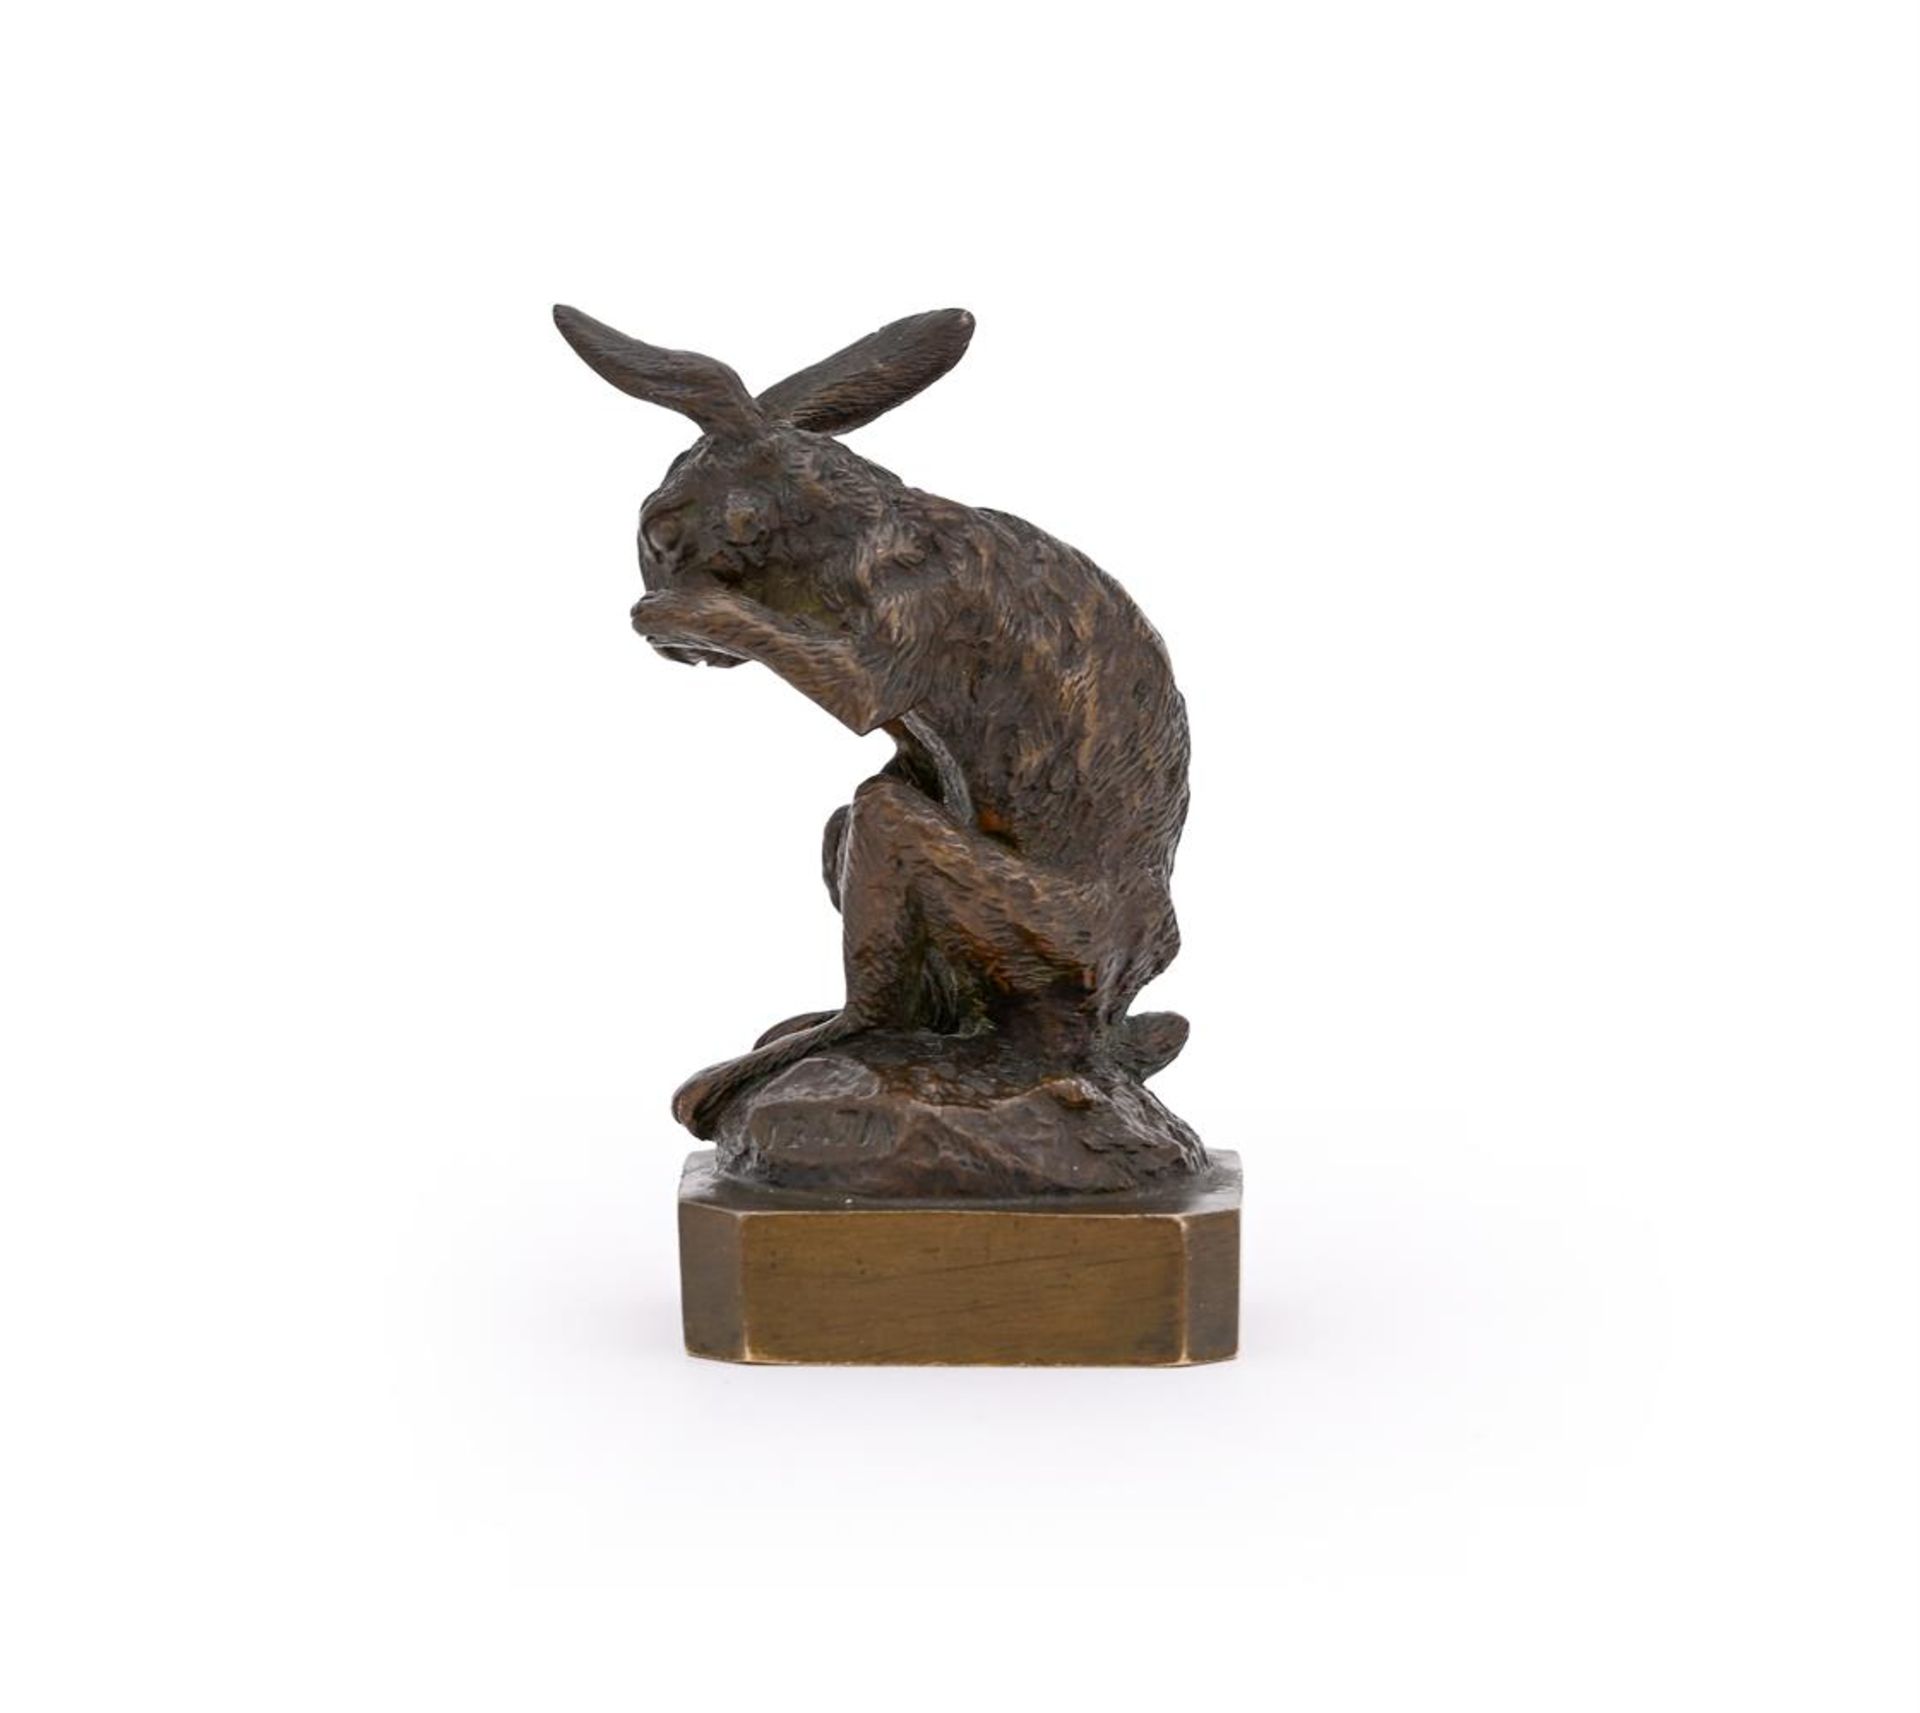 CHRISTOPHE FRATIN (FRENCH, 1801-1864), A BRONZE MODEL OF A HARE GROOMING ITS FACE - Image 5 of 6